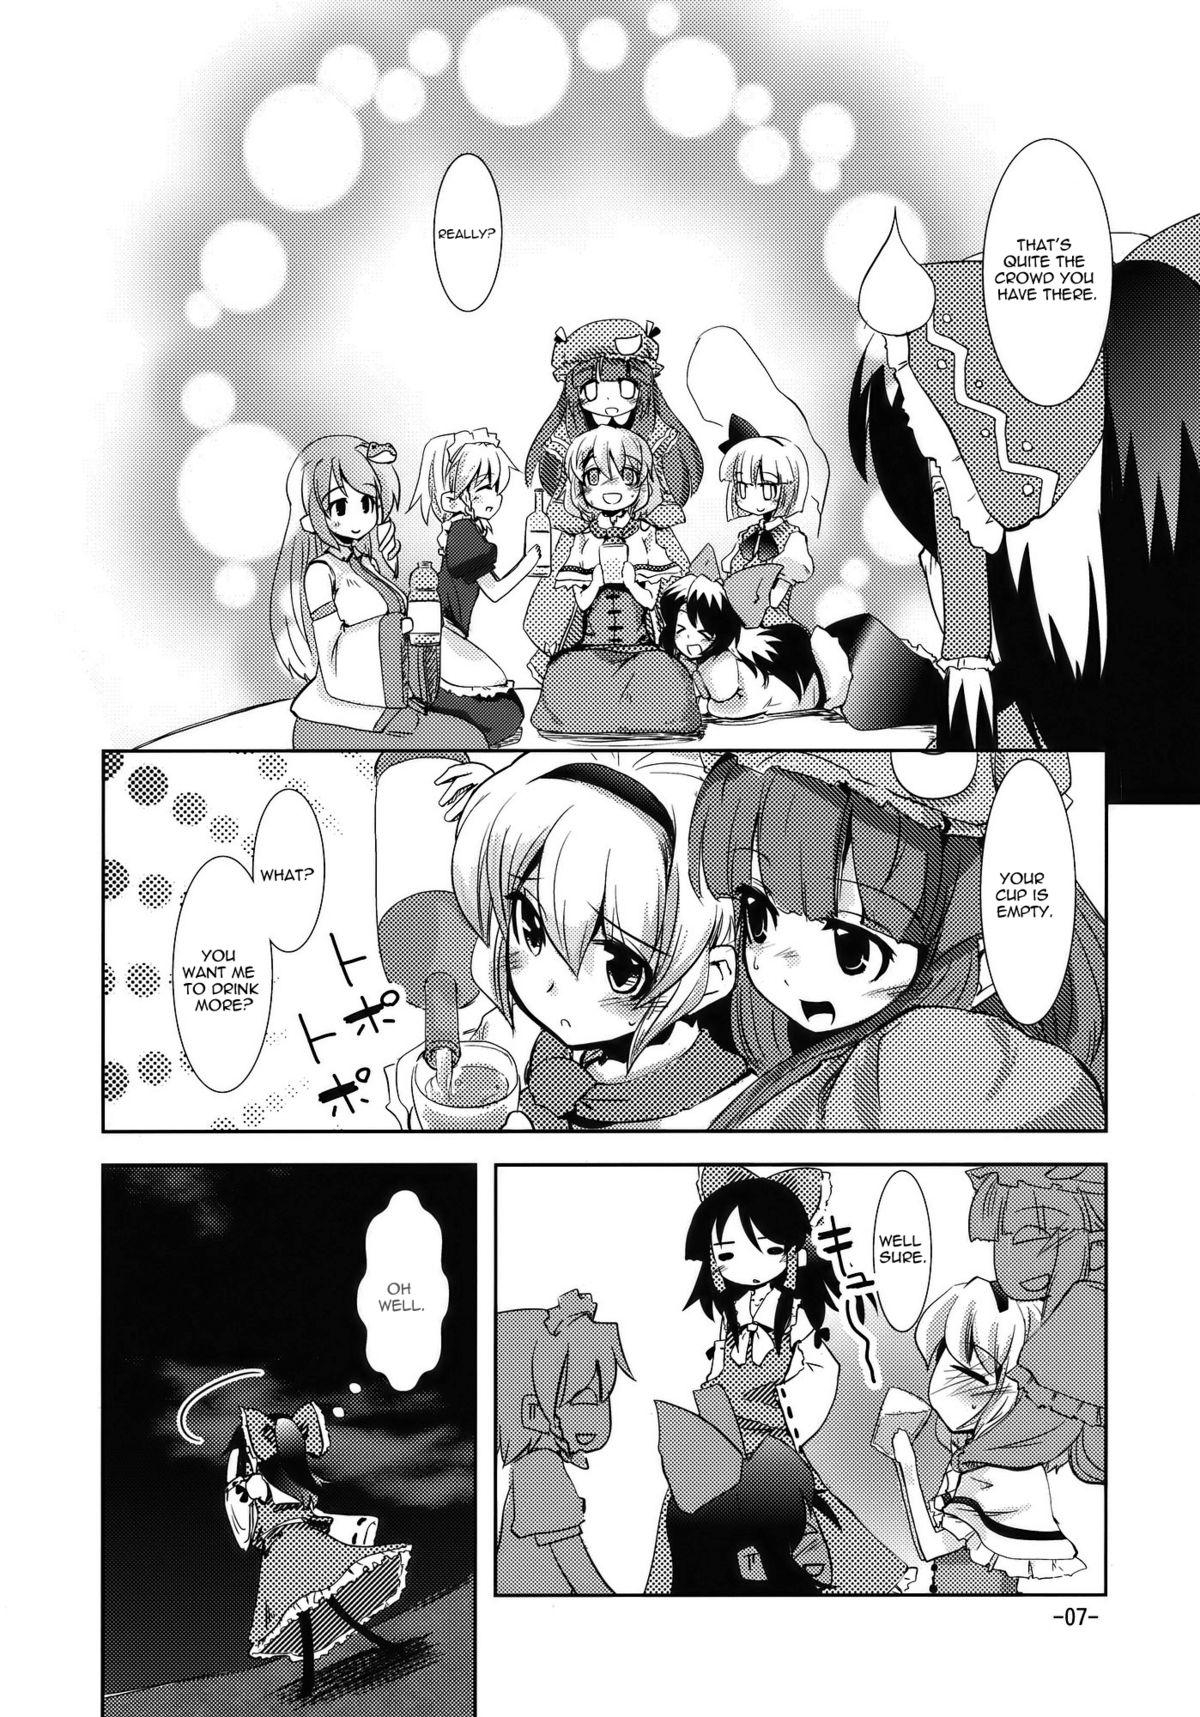 Office Enkai ni Ikou | Let's go to the party - Touhou project Tribute - Page 7